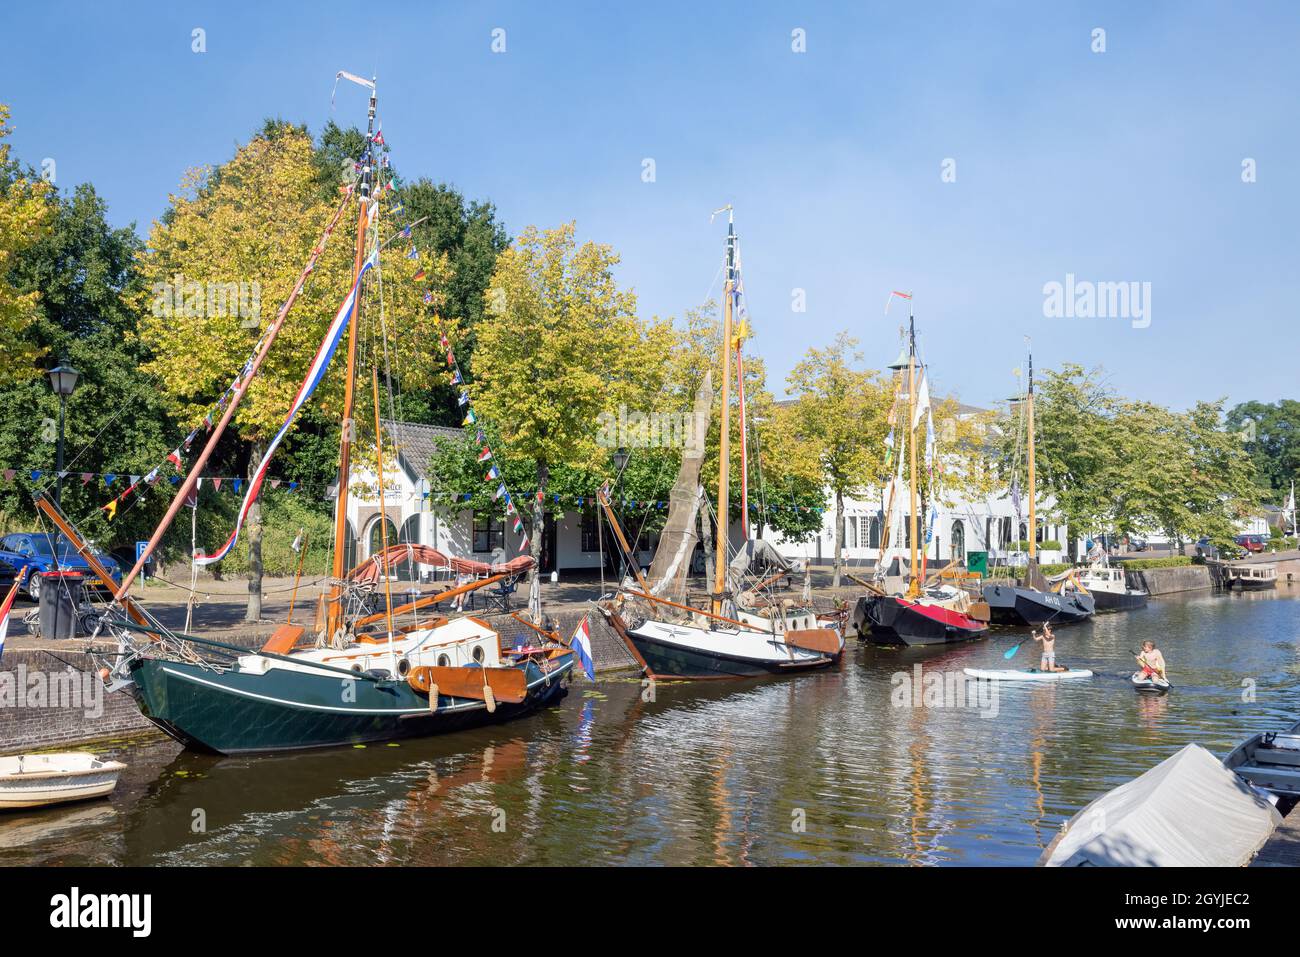 Naarden, The Netherlands - September 08, 2021: Cityscape medieval city Naarden with canal and moored historic sailing ships Stock Photo